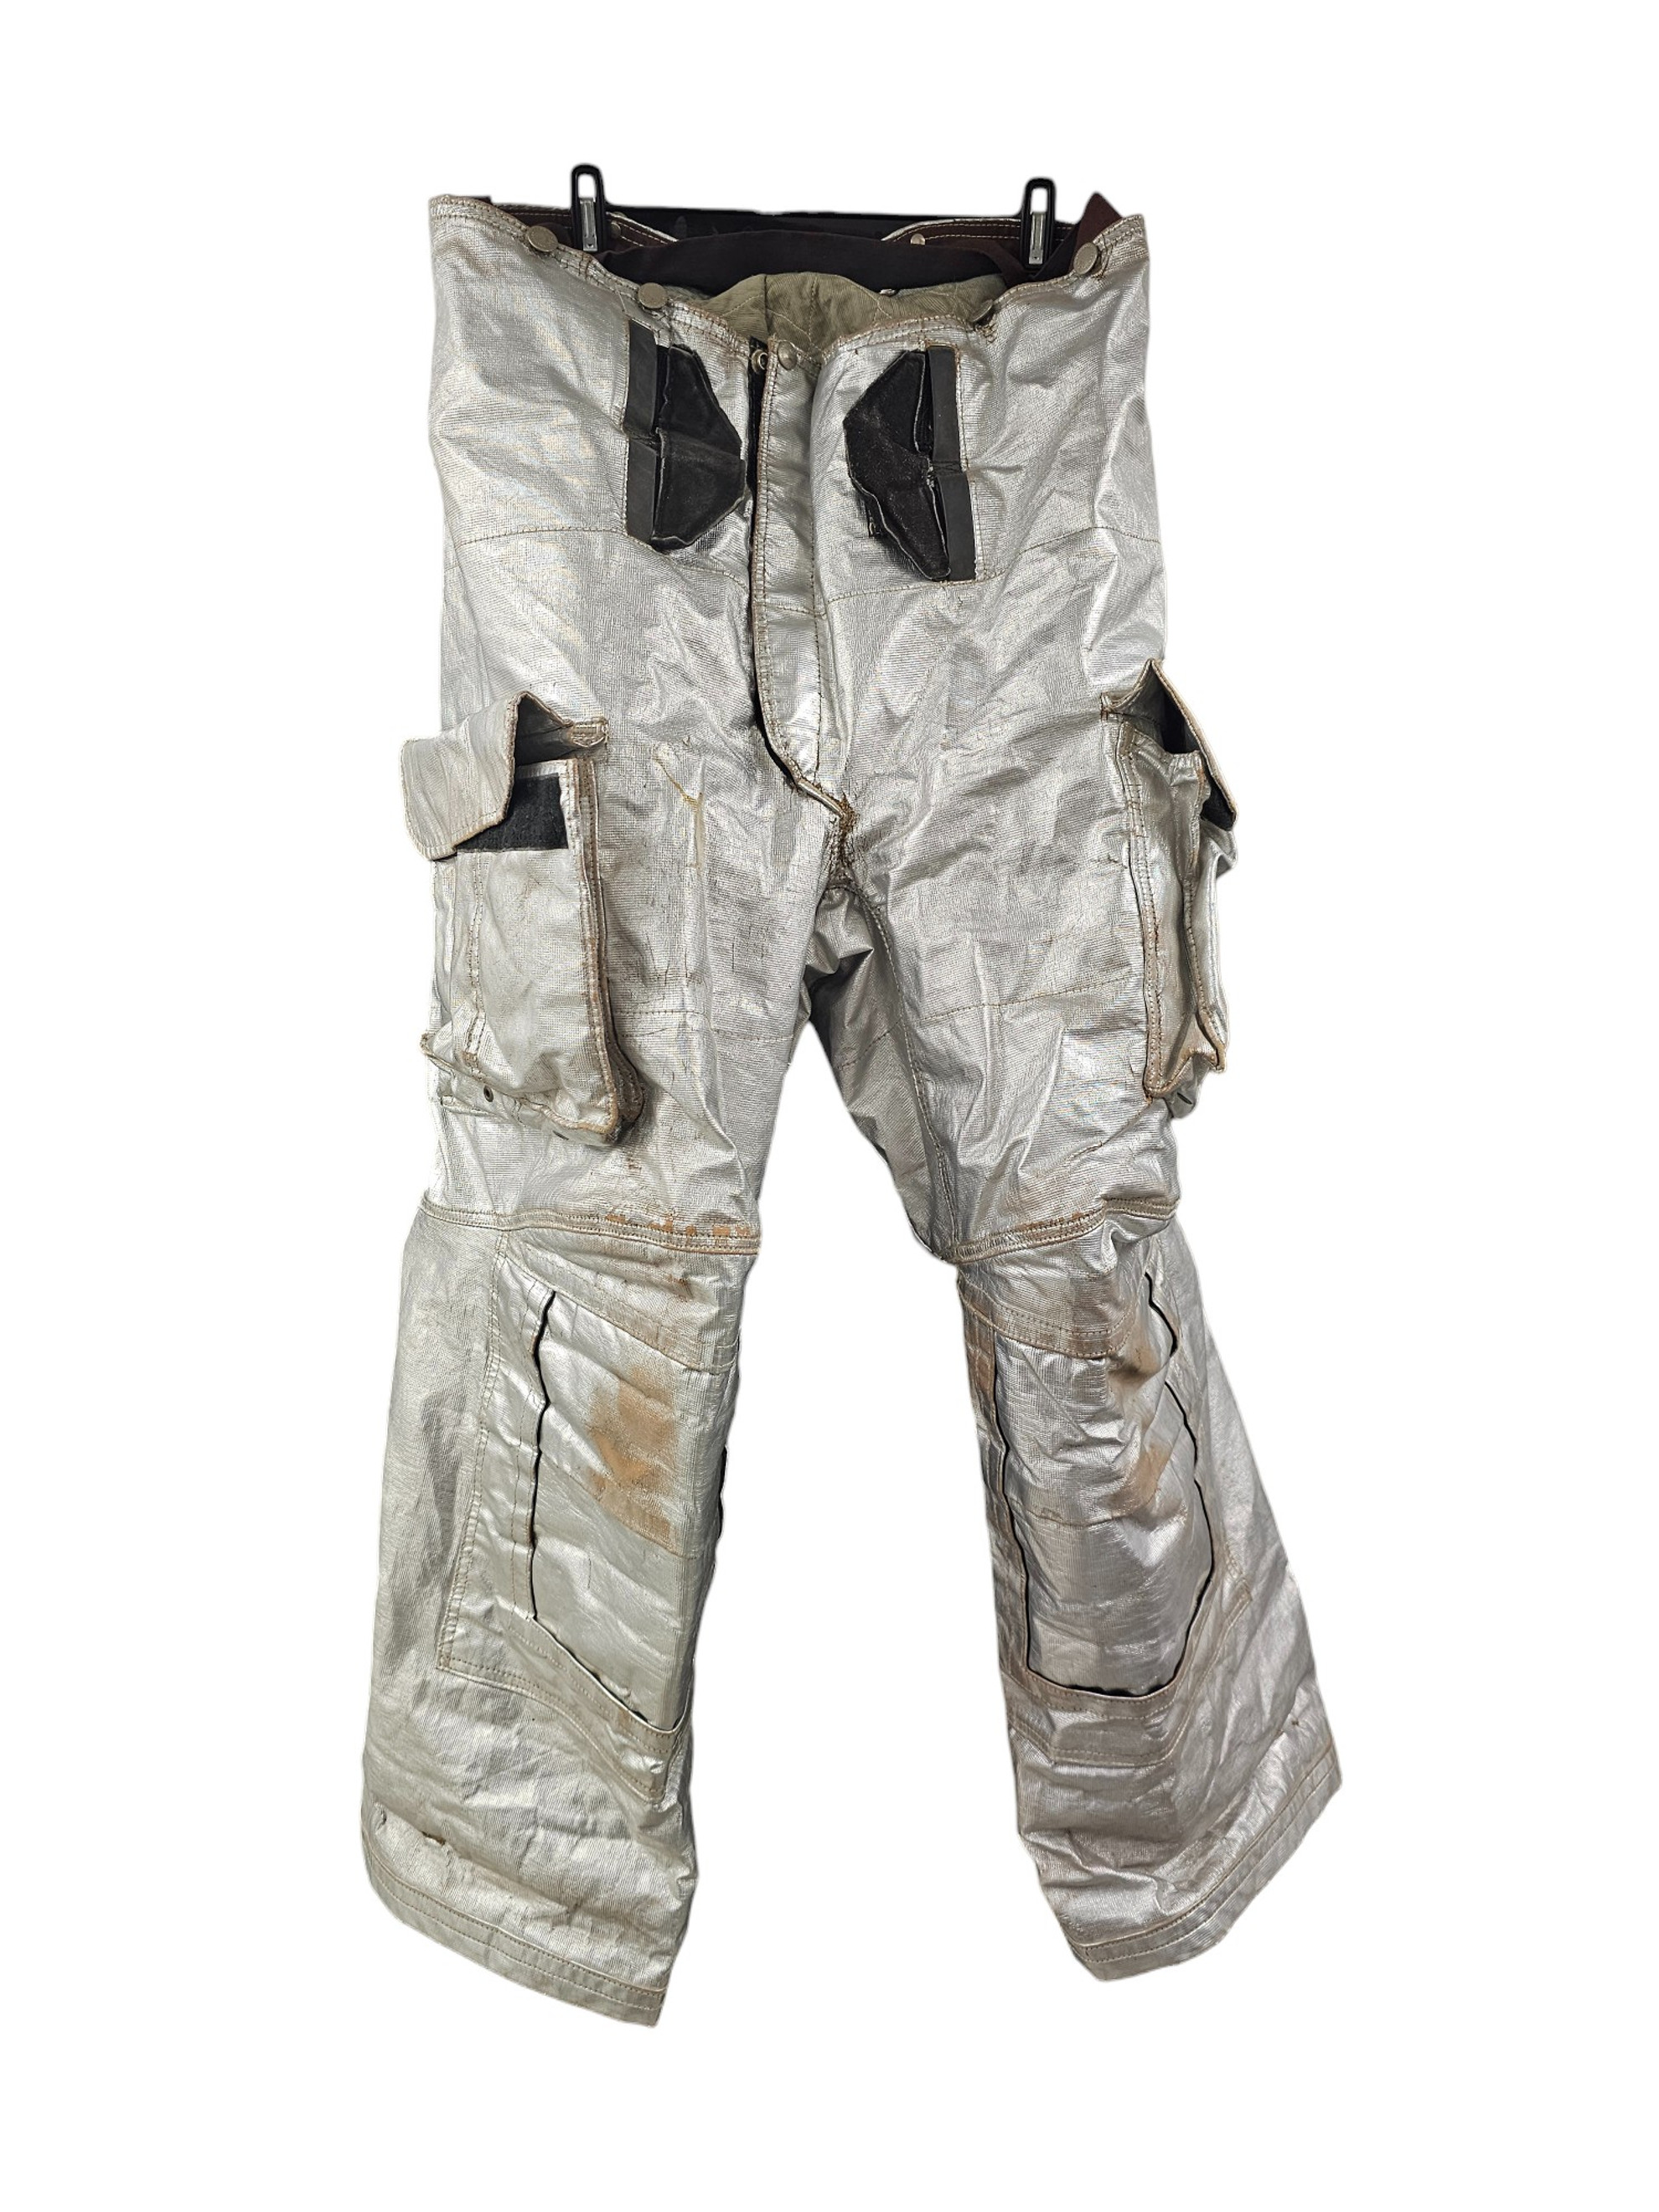 Firefighter's Aluminized Proximity Turnout Pant w/ Liner